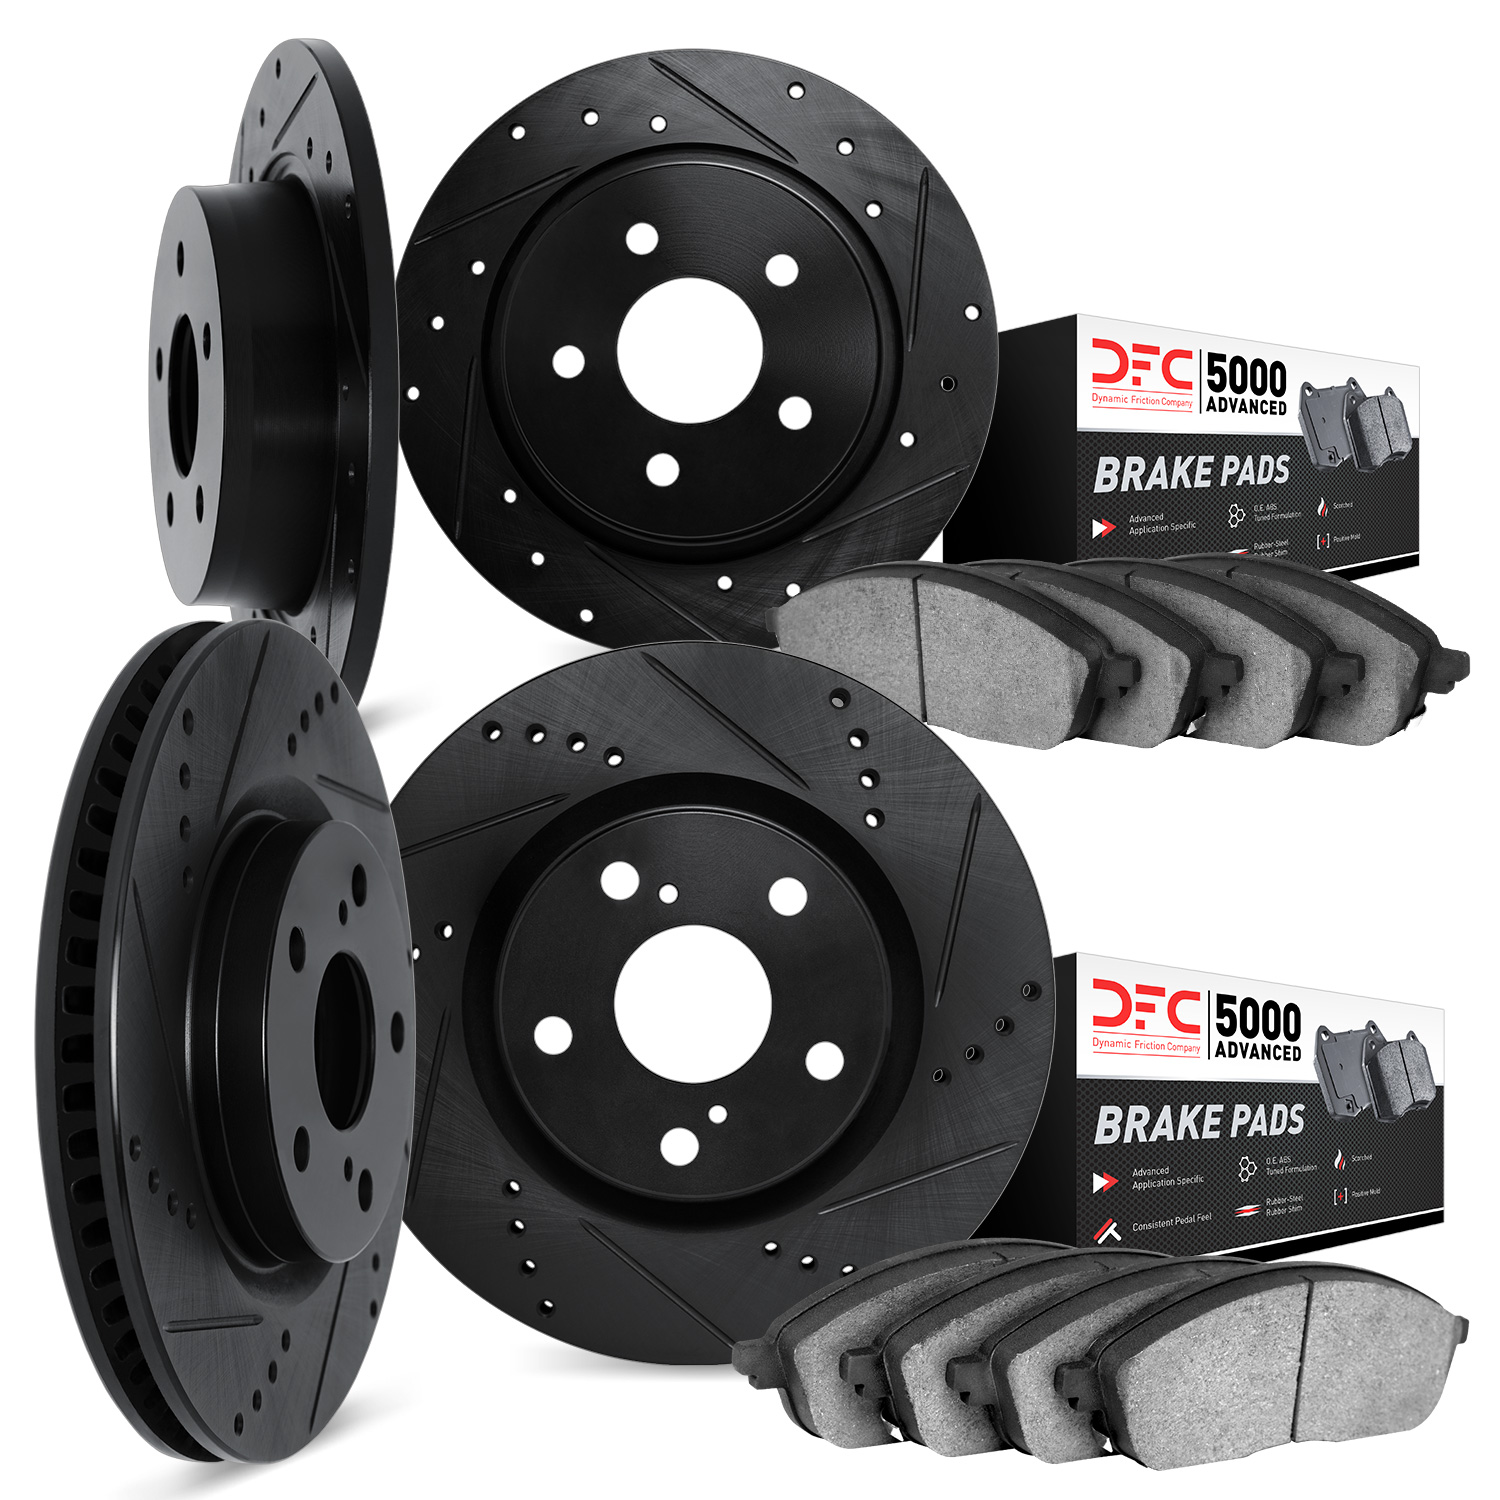 8504-59070 Drilled/Slotted Brake Rotors w/5000 Advanced Brake Pads Kit [Black], 2006-2014 Acura/Honda, Position: Front and Rear